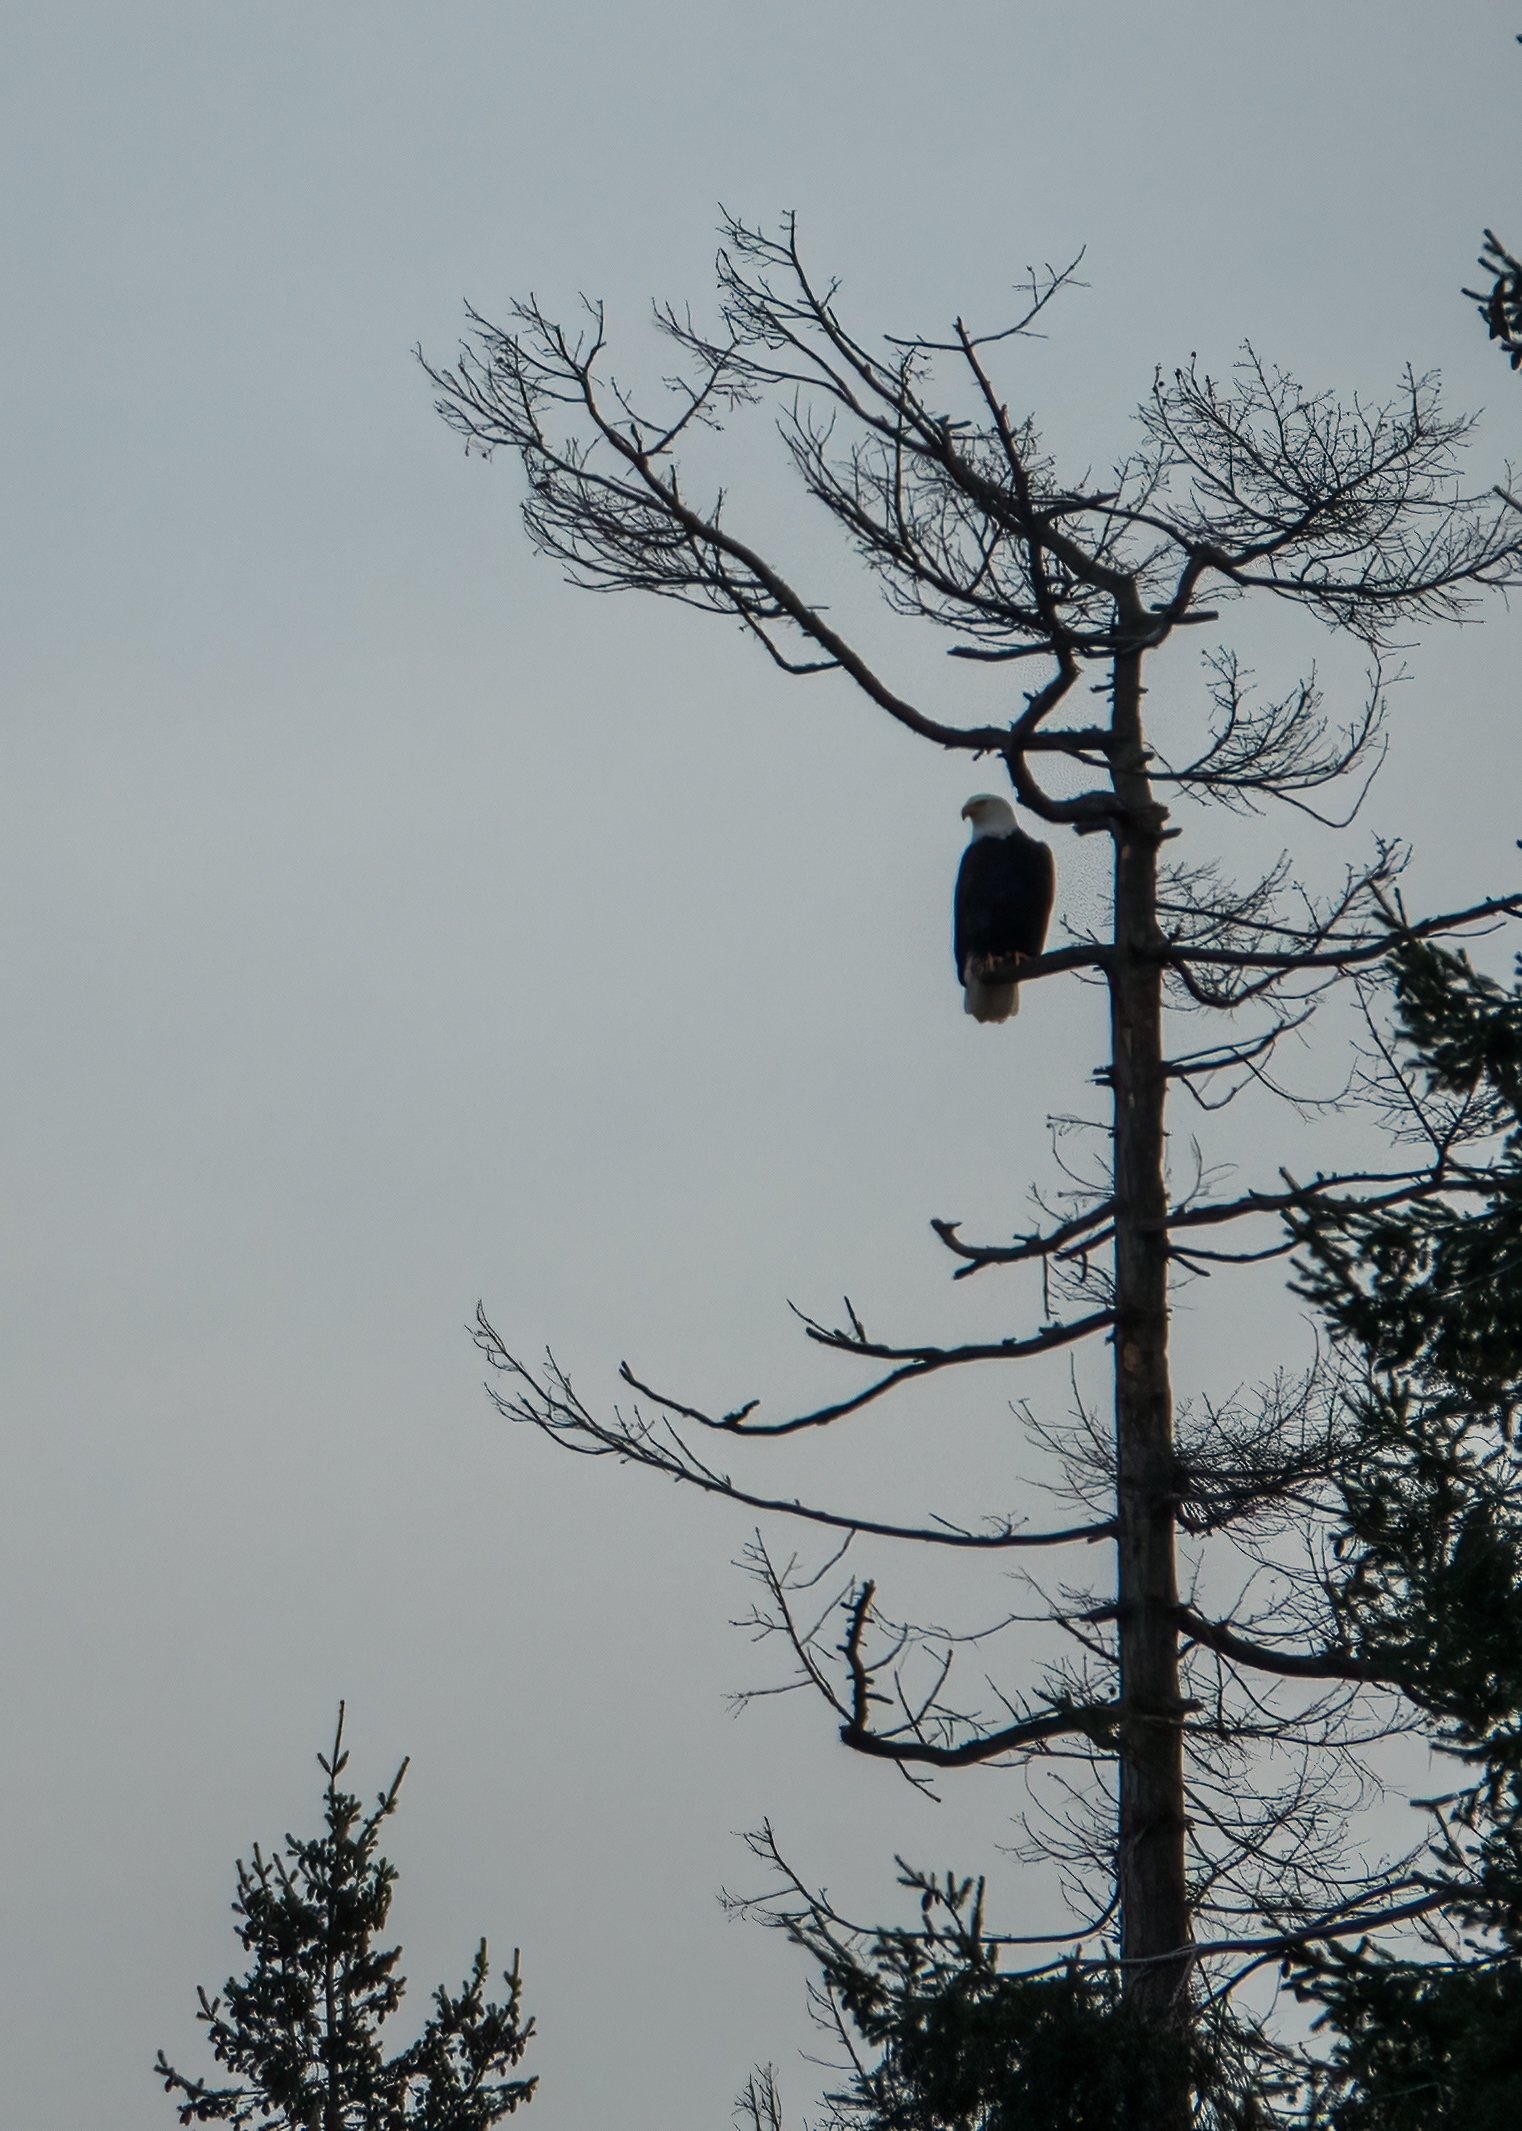  Eagle in the trees down at the water’s edge. 